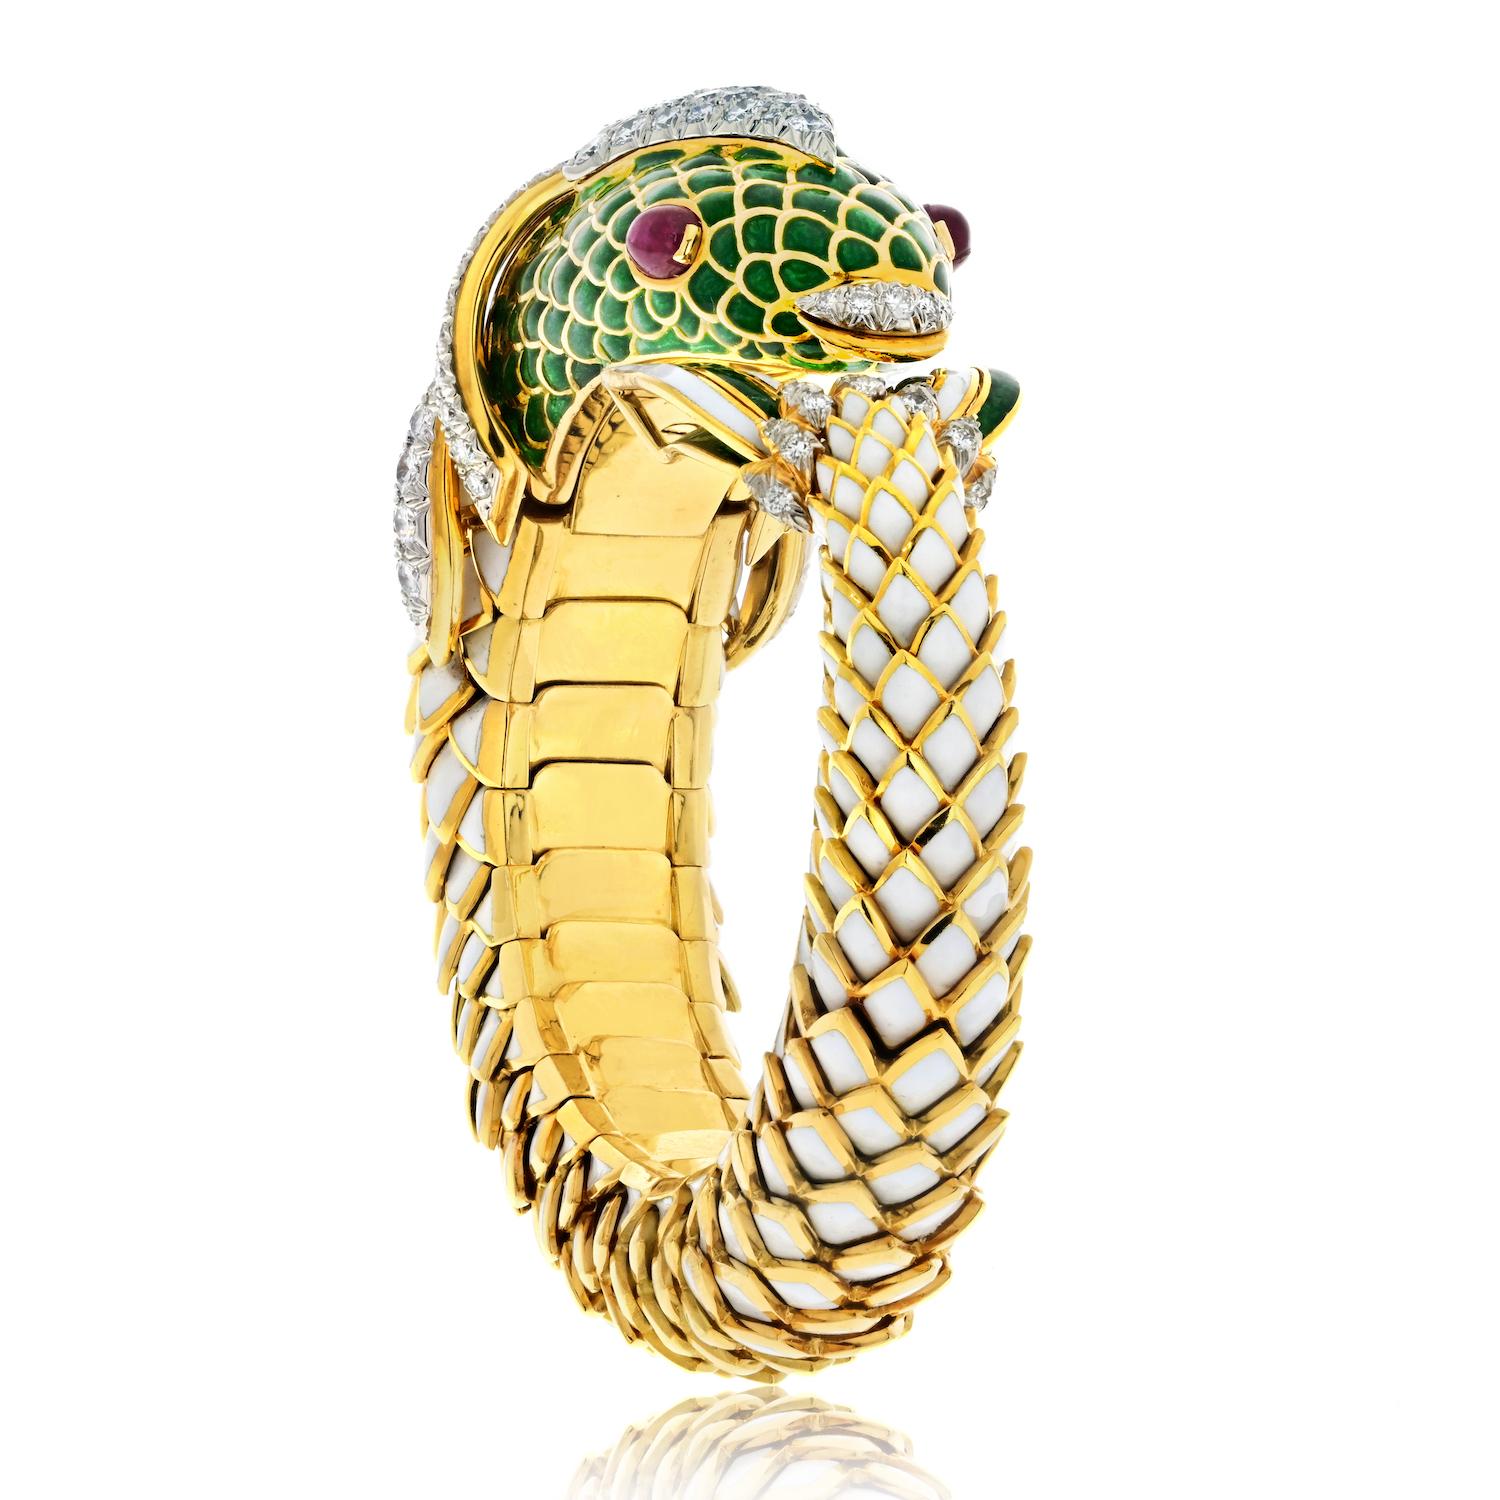 Dive into the world of artistry and craftsmanship with this exceptional estate bracelet designed by the renowned David Webb. Crafted in the form of a graceful Koi fish, this masterpiece transcends traditional jewelry design.

The Koi fish, rendered